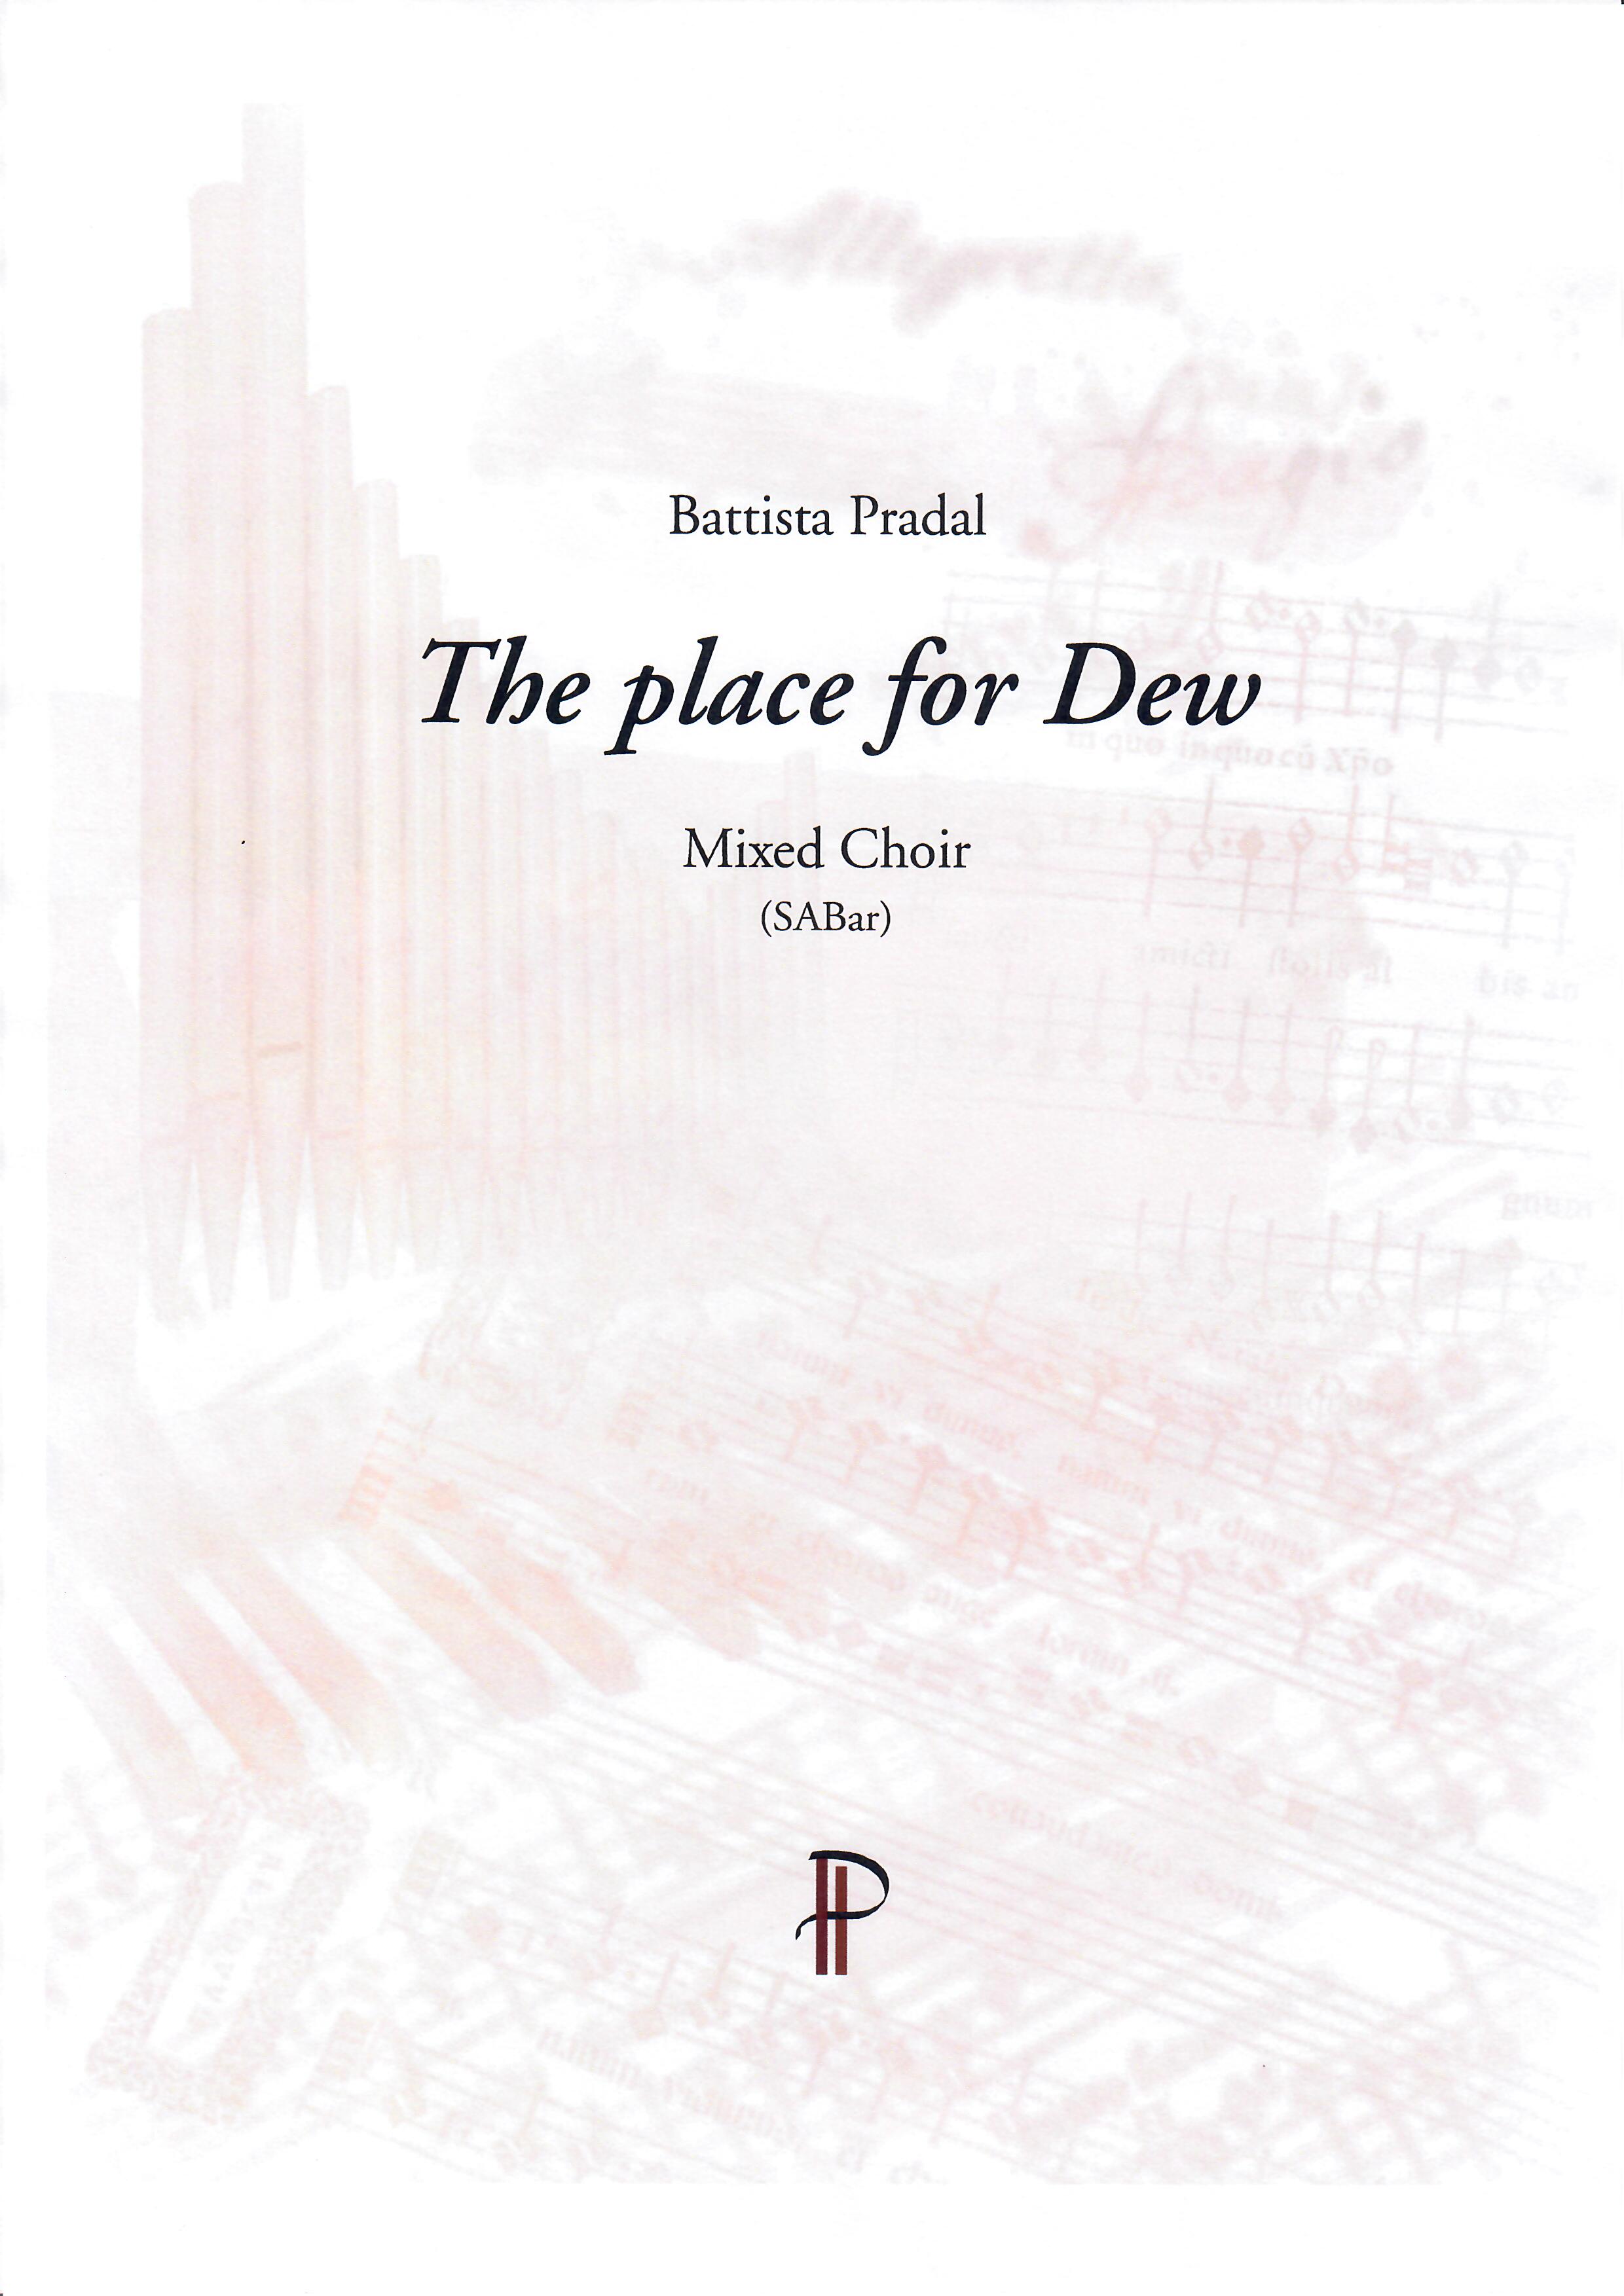 The place for Dew - Show sample score